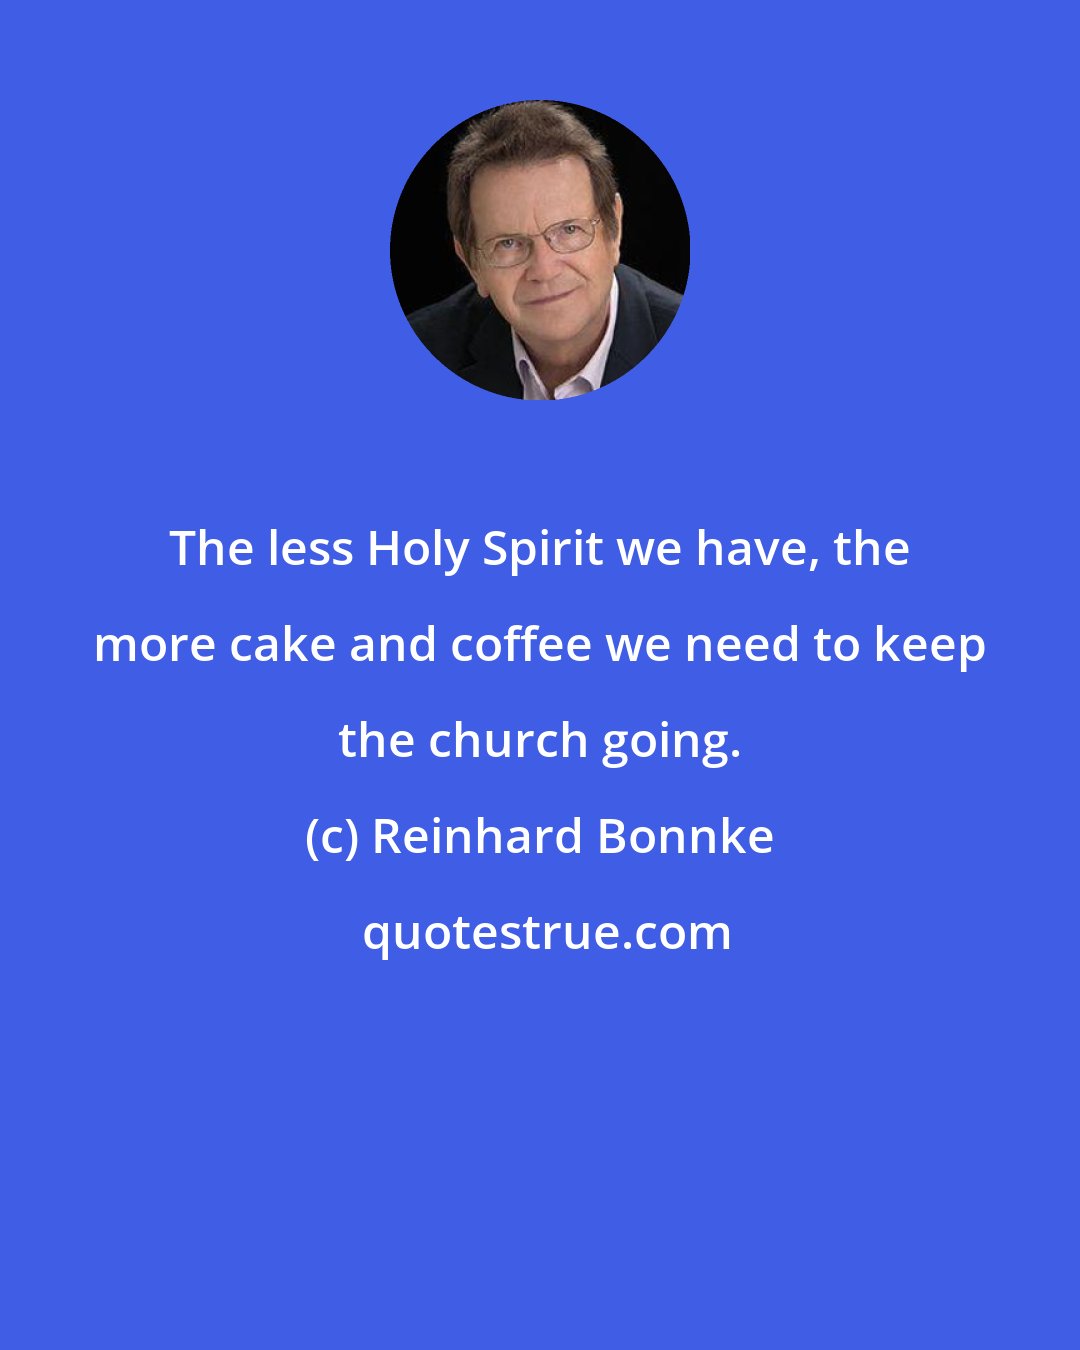 Reinhard Bonnke: The less Holy Spirit we have, the more cake and coffee we need to keep the church going.